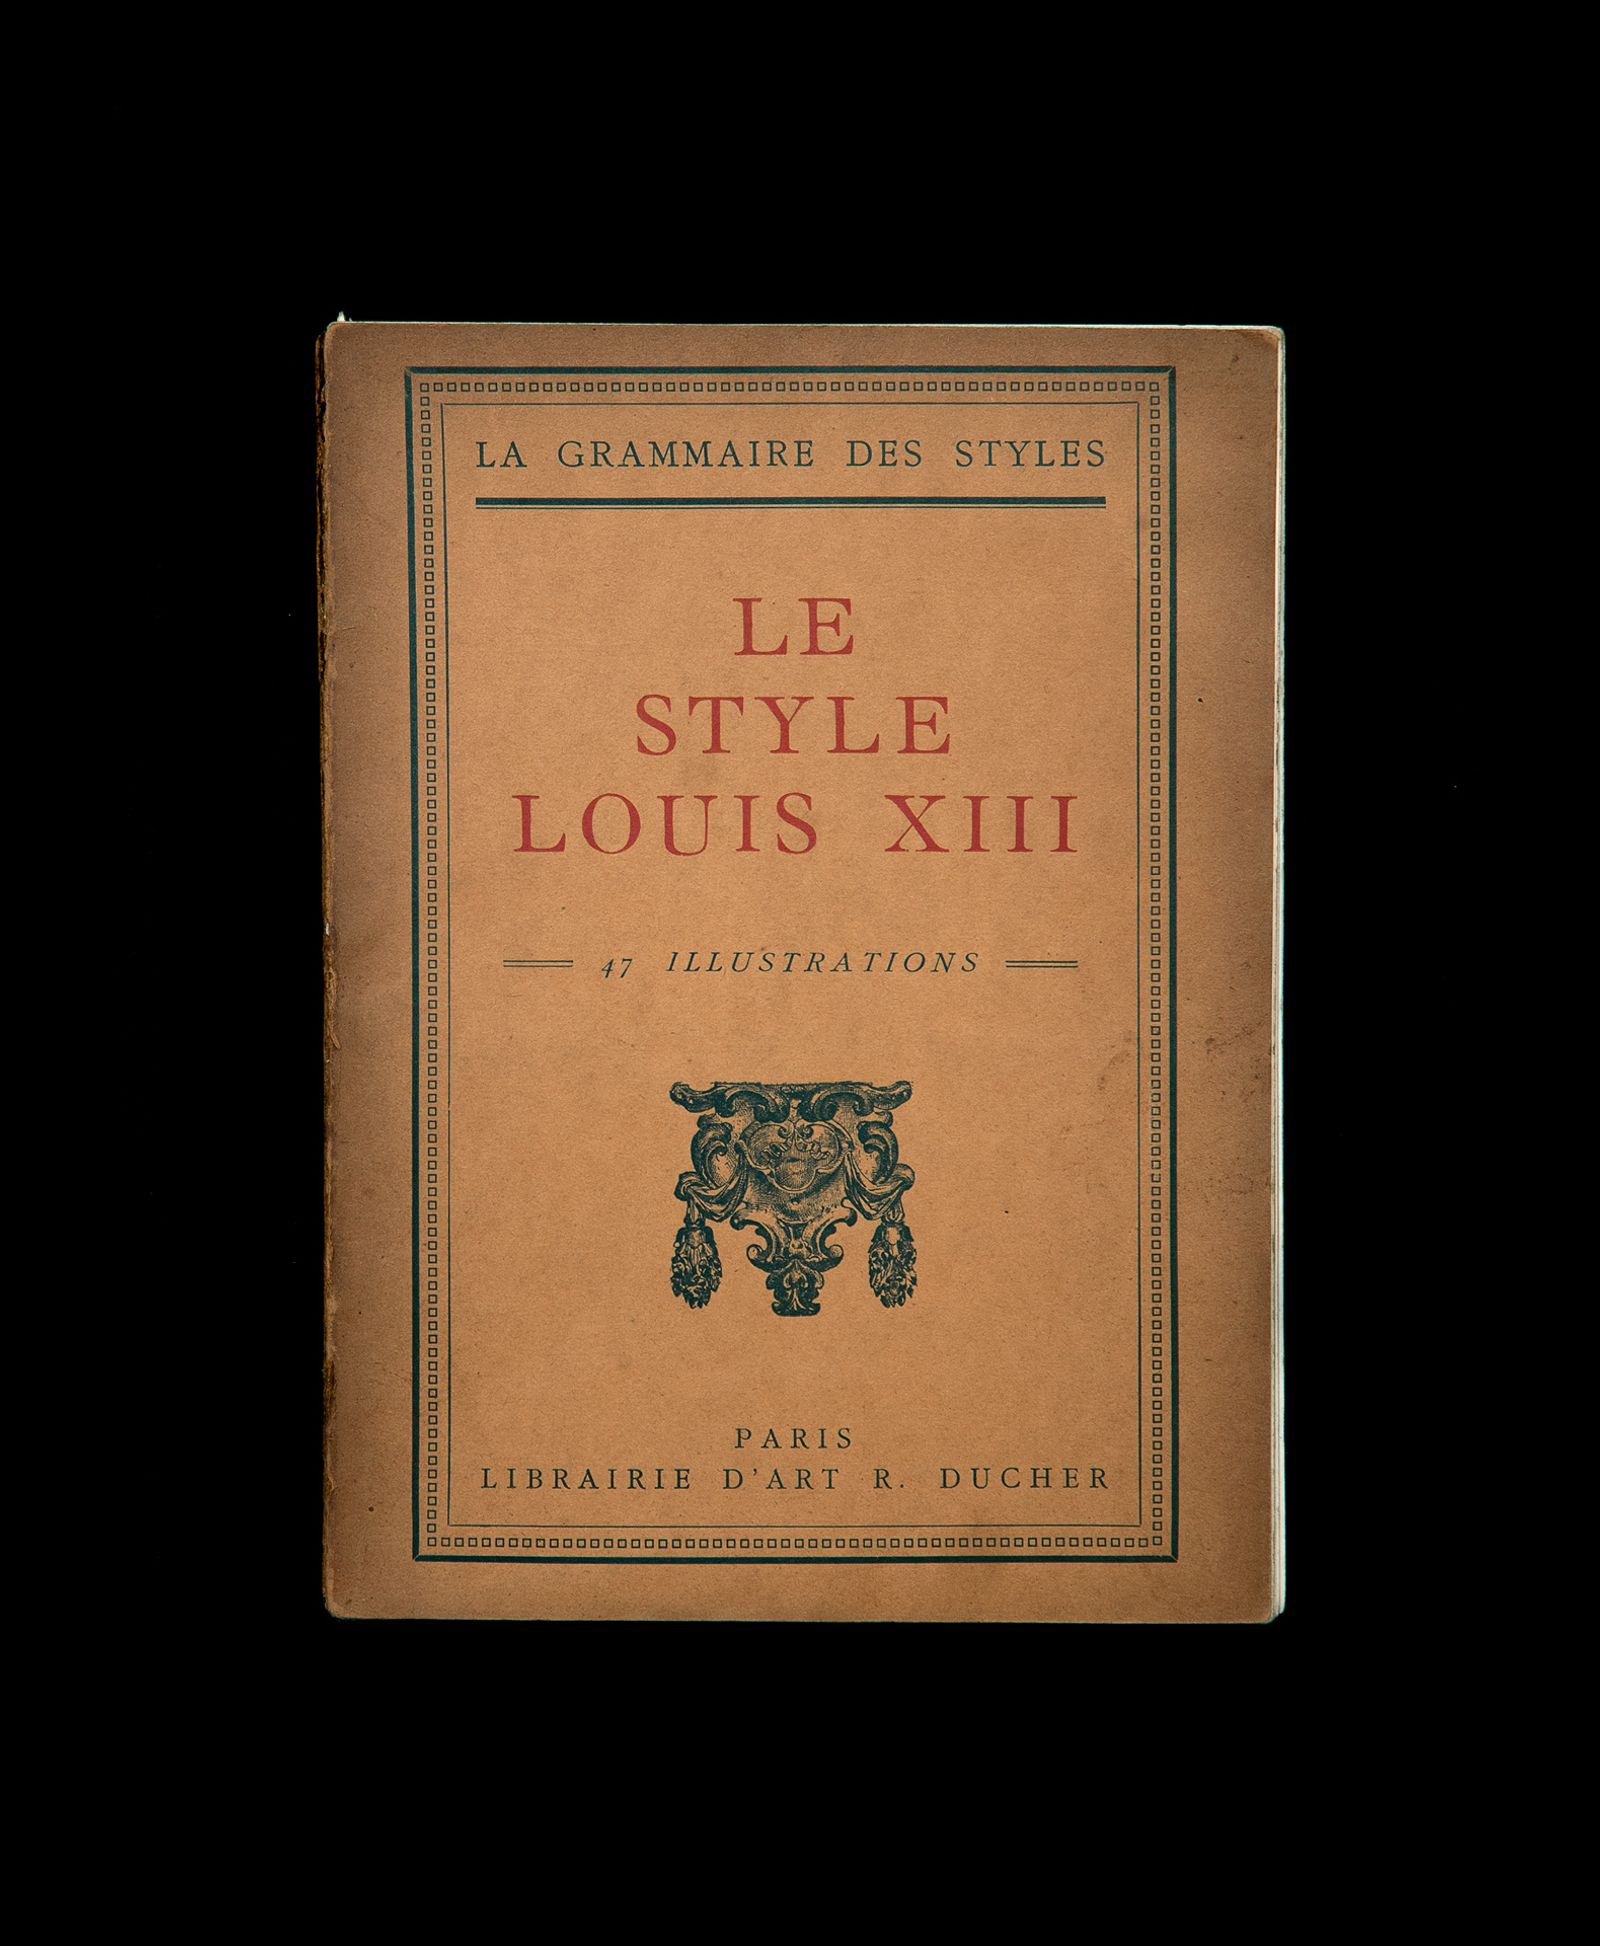 © Lihuel González - To listen to this audio book click on this link : https://archive.org/details/False_friends/Le+Style+Louis+XIII.mp3